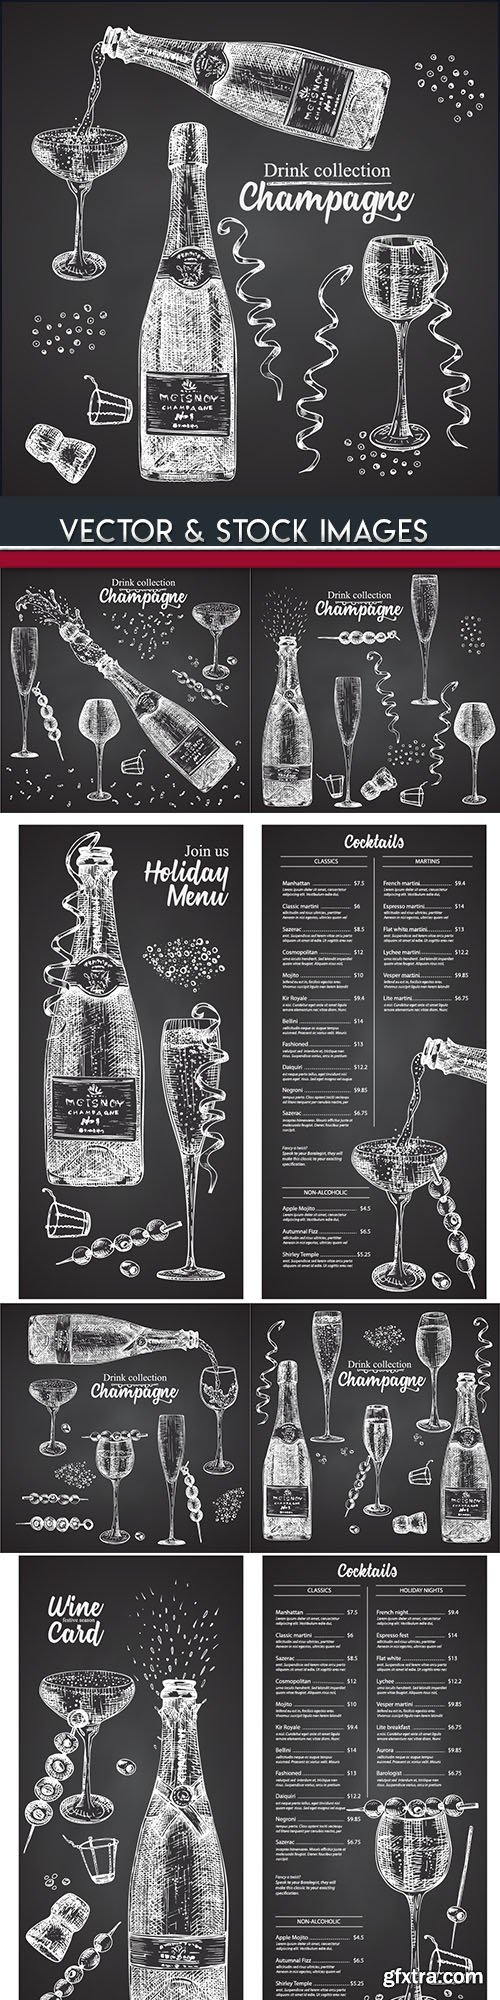 Champagne collection drinks drawn illustrations